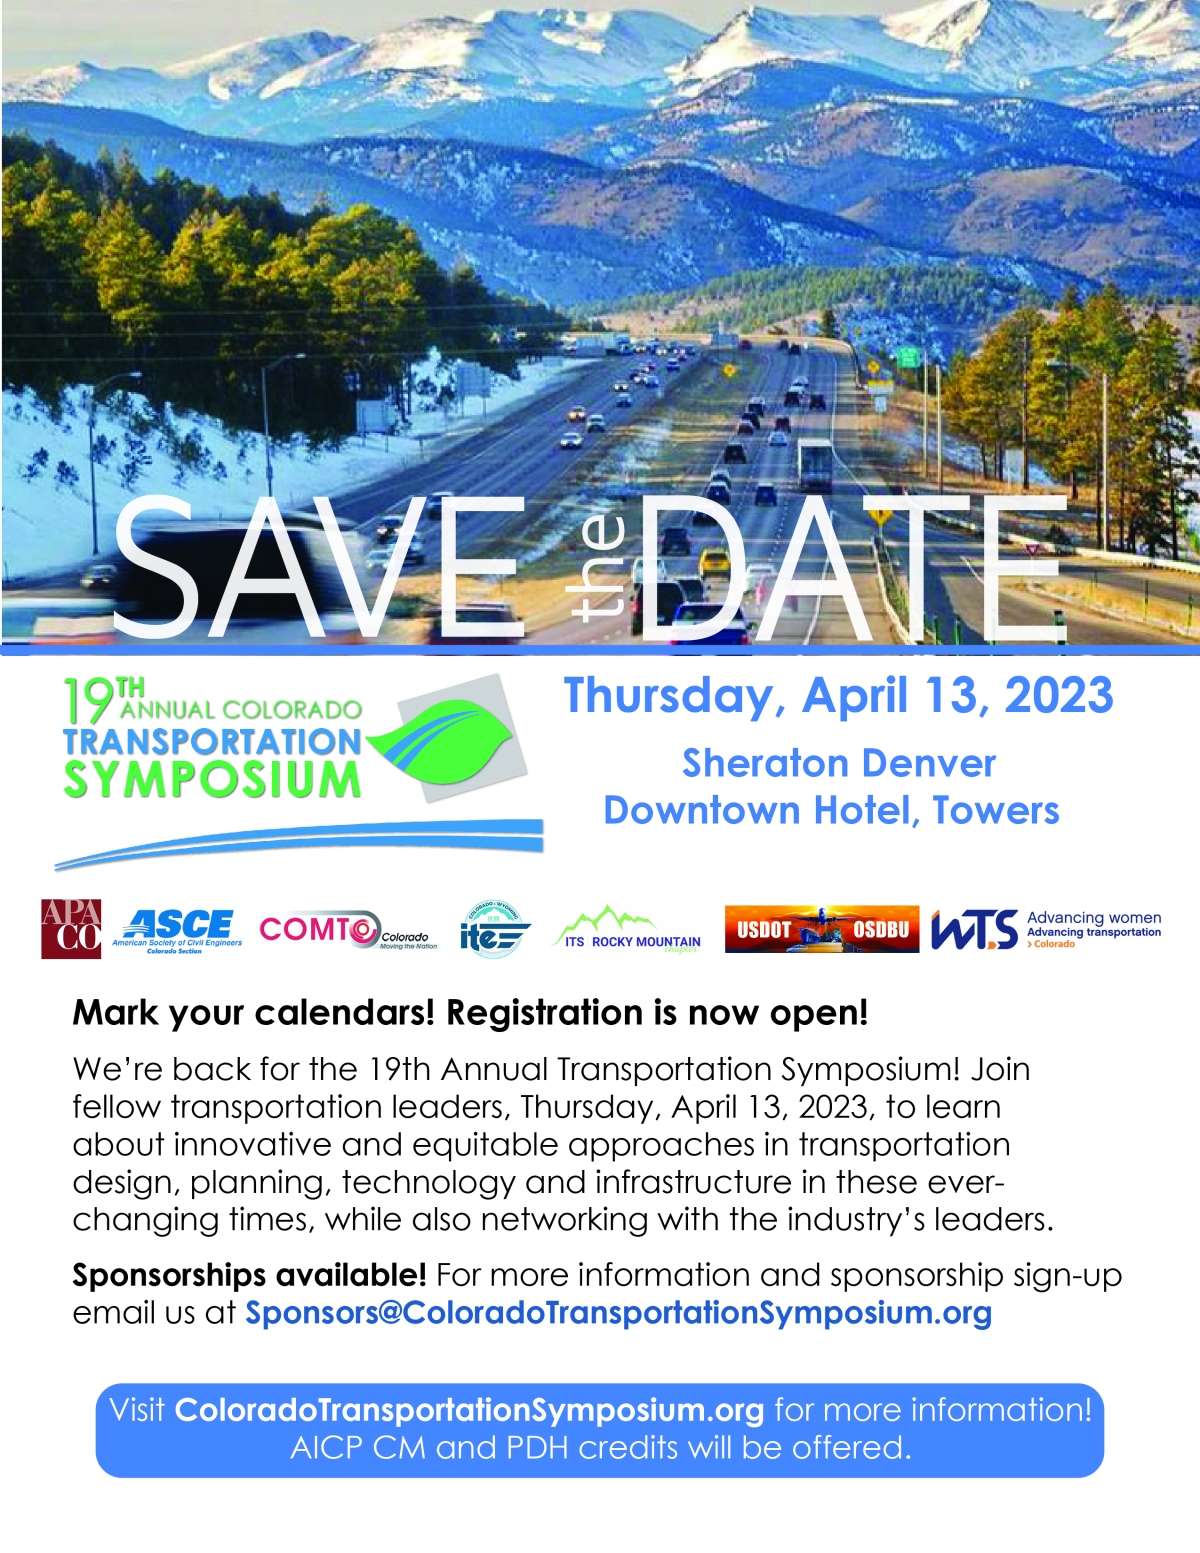 Save the Date for the 19th Colorado Annual Transportation Symposium on April 13